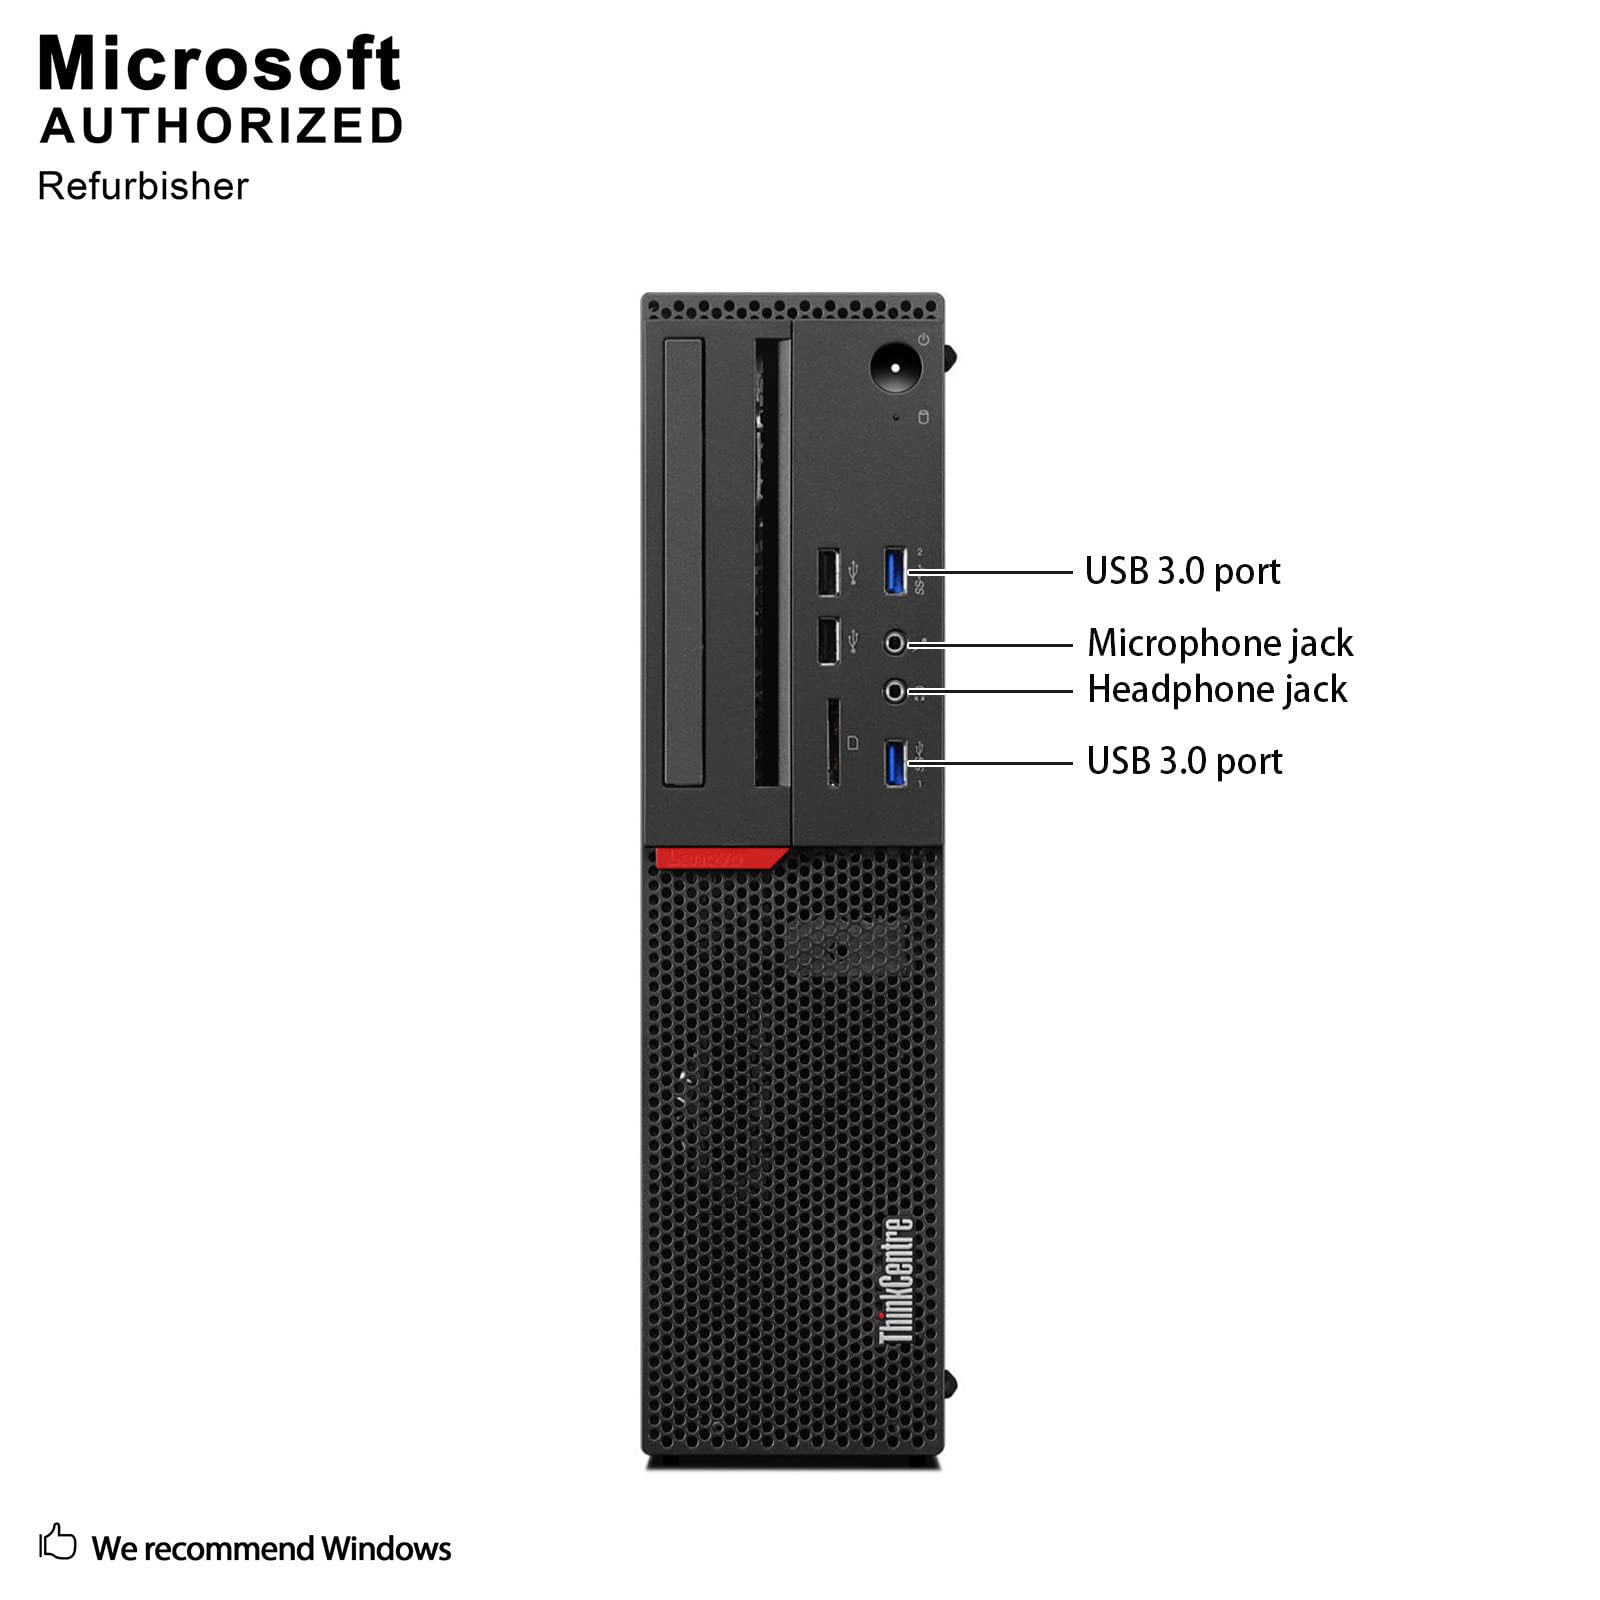 Lenovo ThinkCentre M900 Small Form Factor PC, Intel Quad Core i5-6500 up to 3.6GHz, 8G DDR4, 500G, WiFi, BT 4.0, DVD, Windows 10 64-Multi-Language Support English/Spanish/French (Renewed)